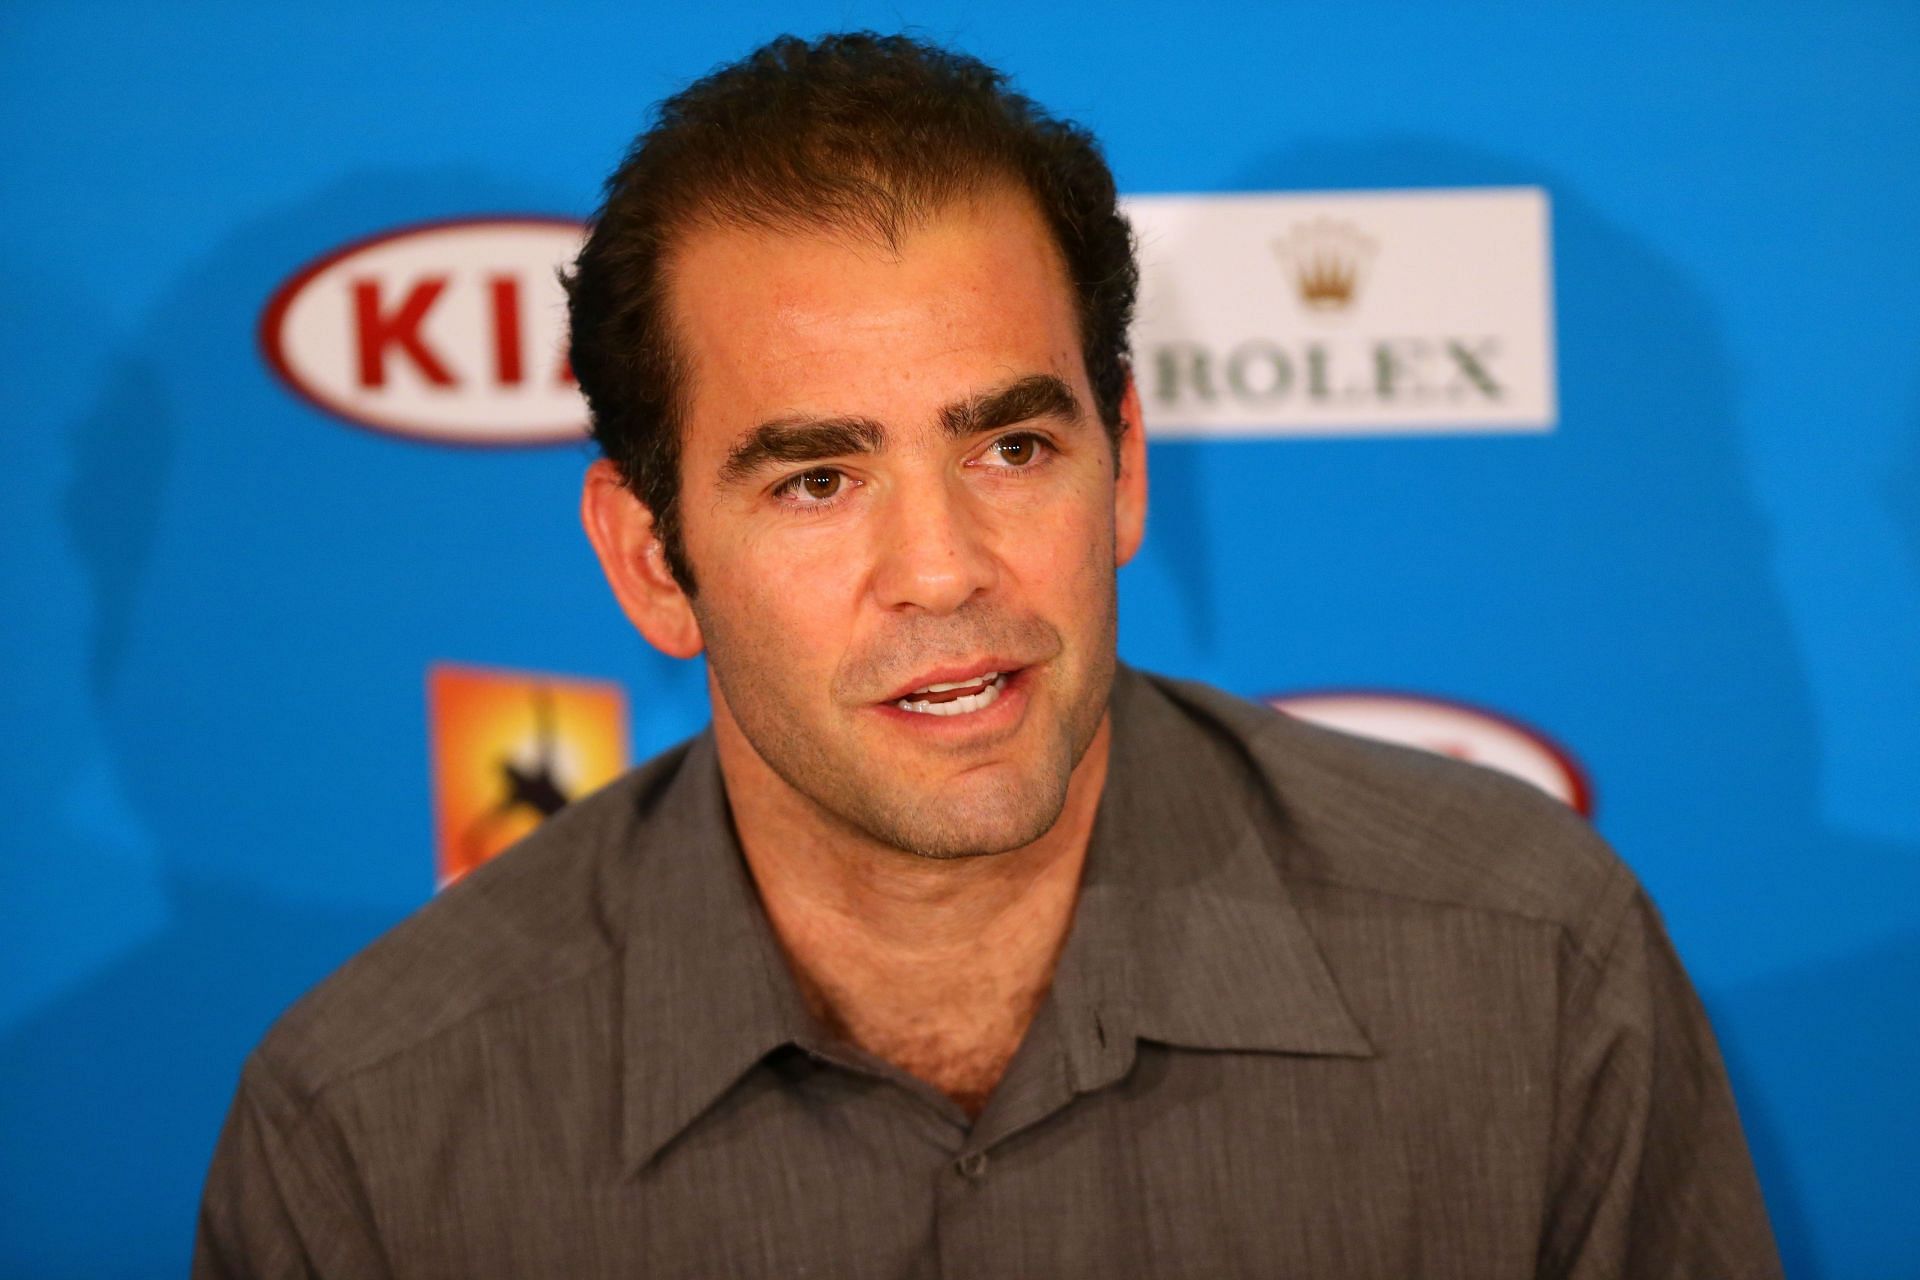 “I can totally understand why Jimmy Connors was always such a loner” – When Pete Sampras commented on getting over his awe of John McEnroe